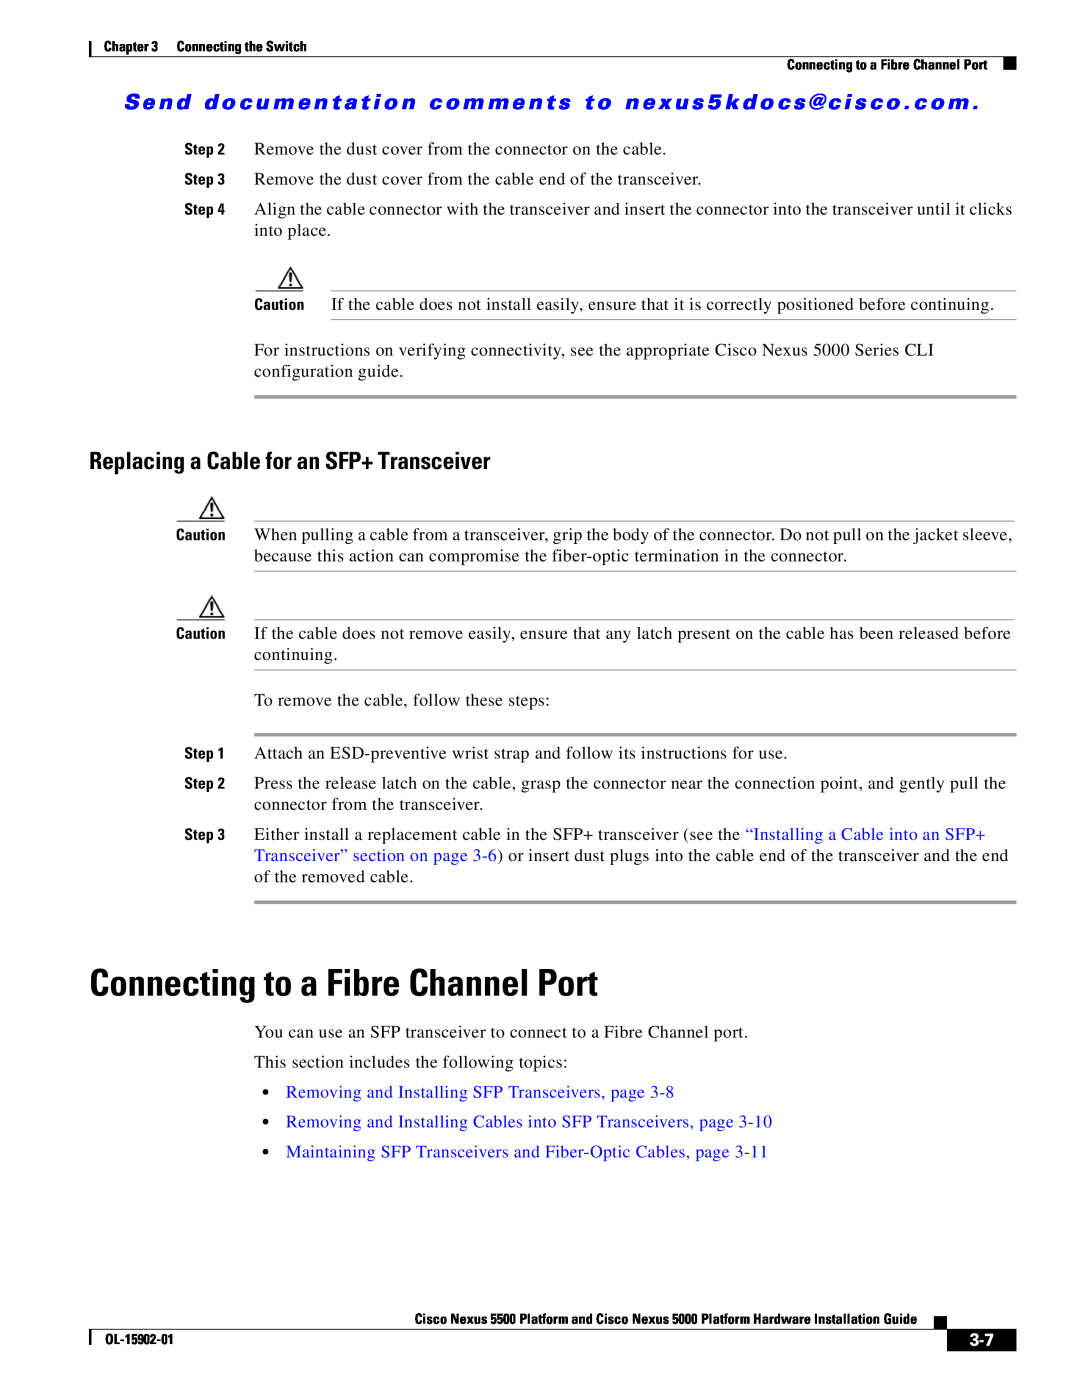 Cisco Systems 5000 manual Connecting to a Fibre Channel Port, Replacing a Cable for an SFP+ Transceiver 